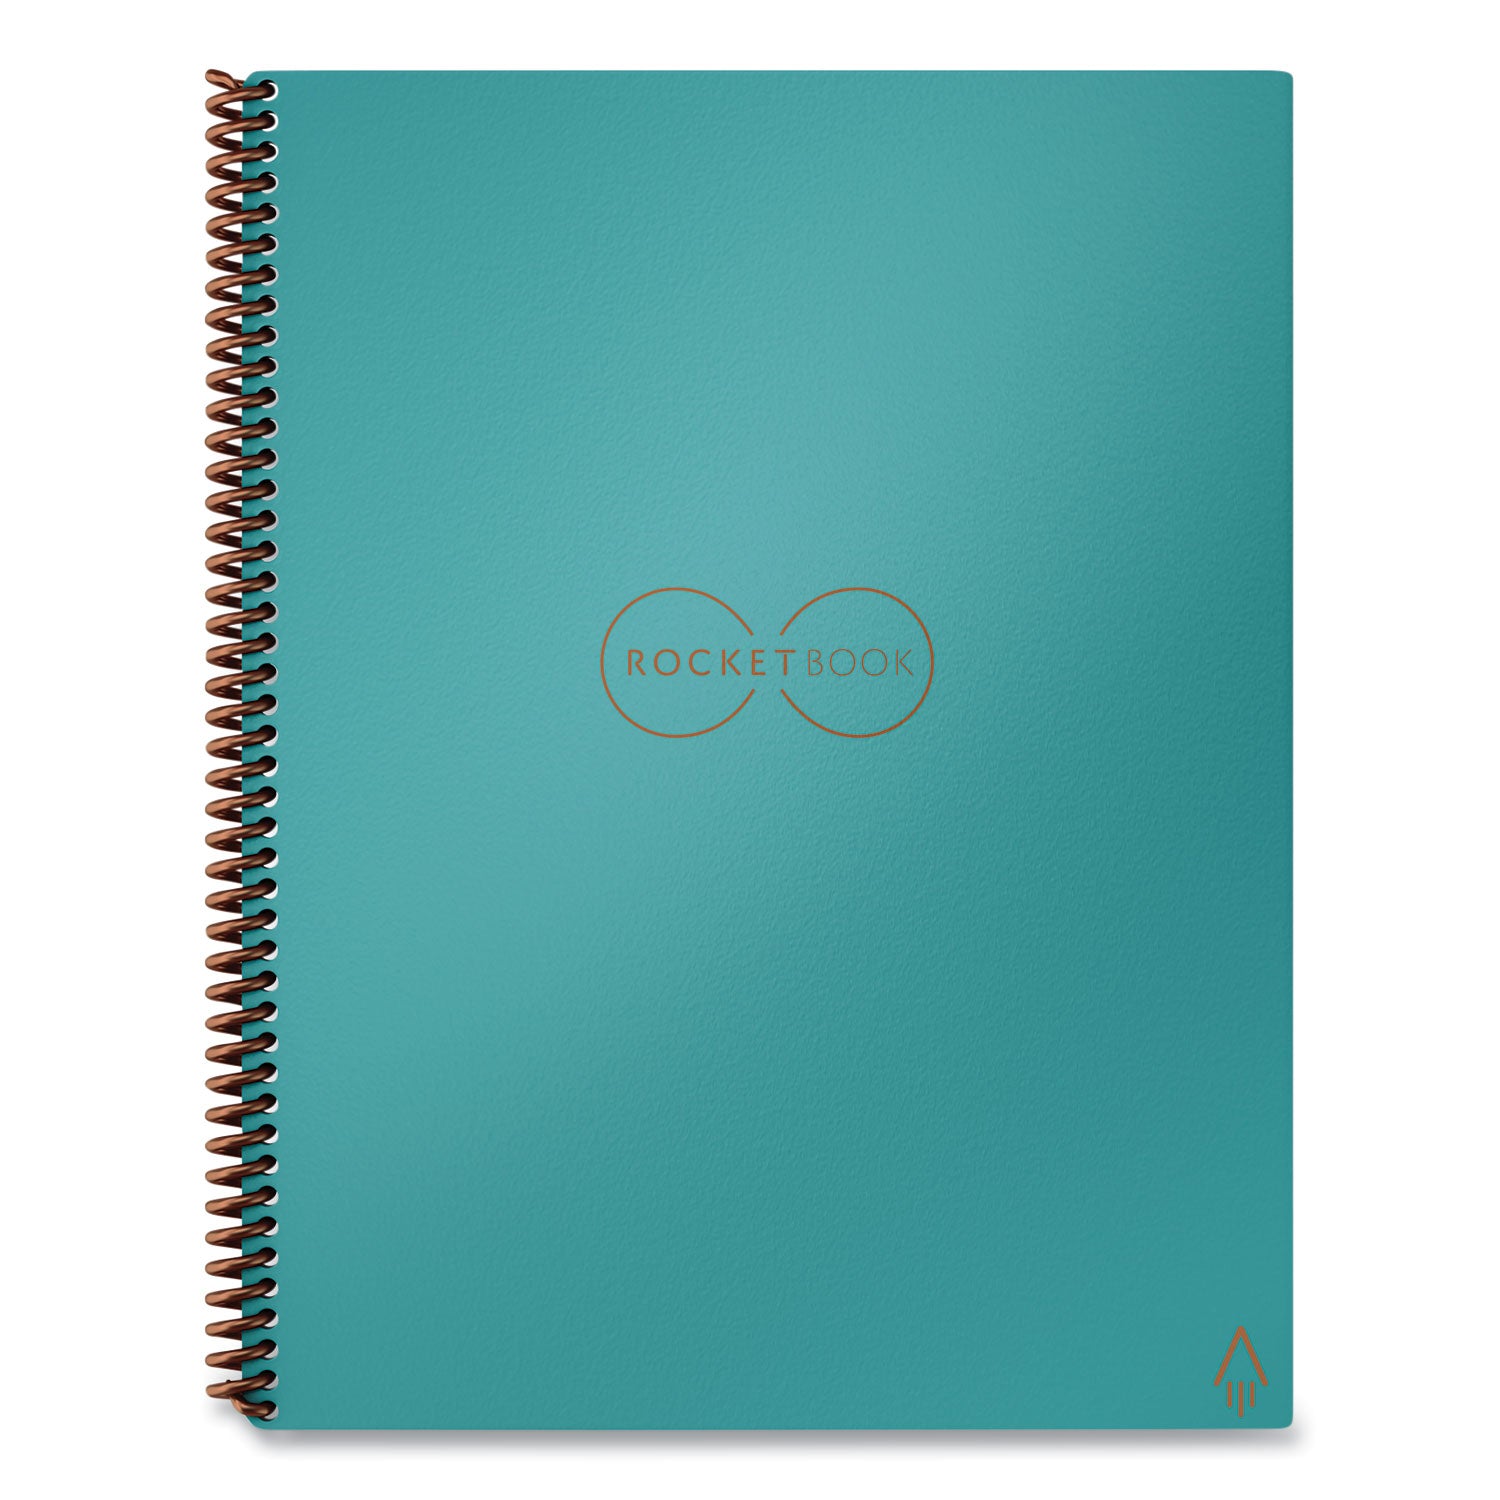 core-smart-notebook-dotted-rule-neptune-teal-cover-16-11-x-85-sheets_rkbevrlrcce - 2